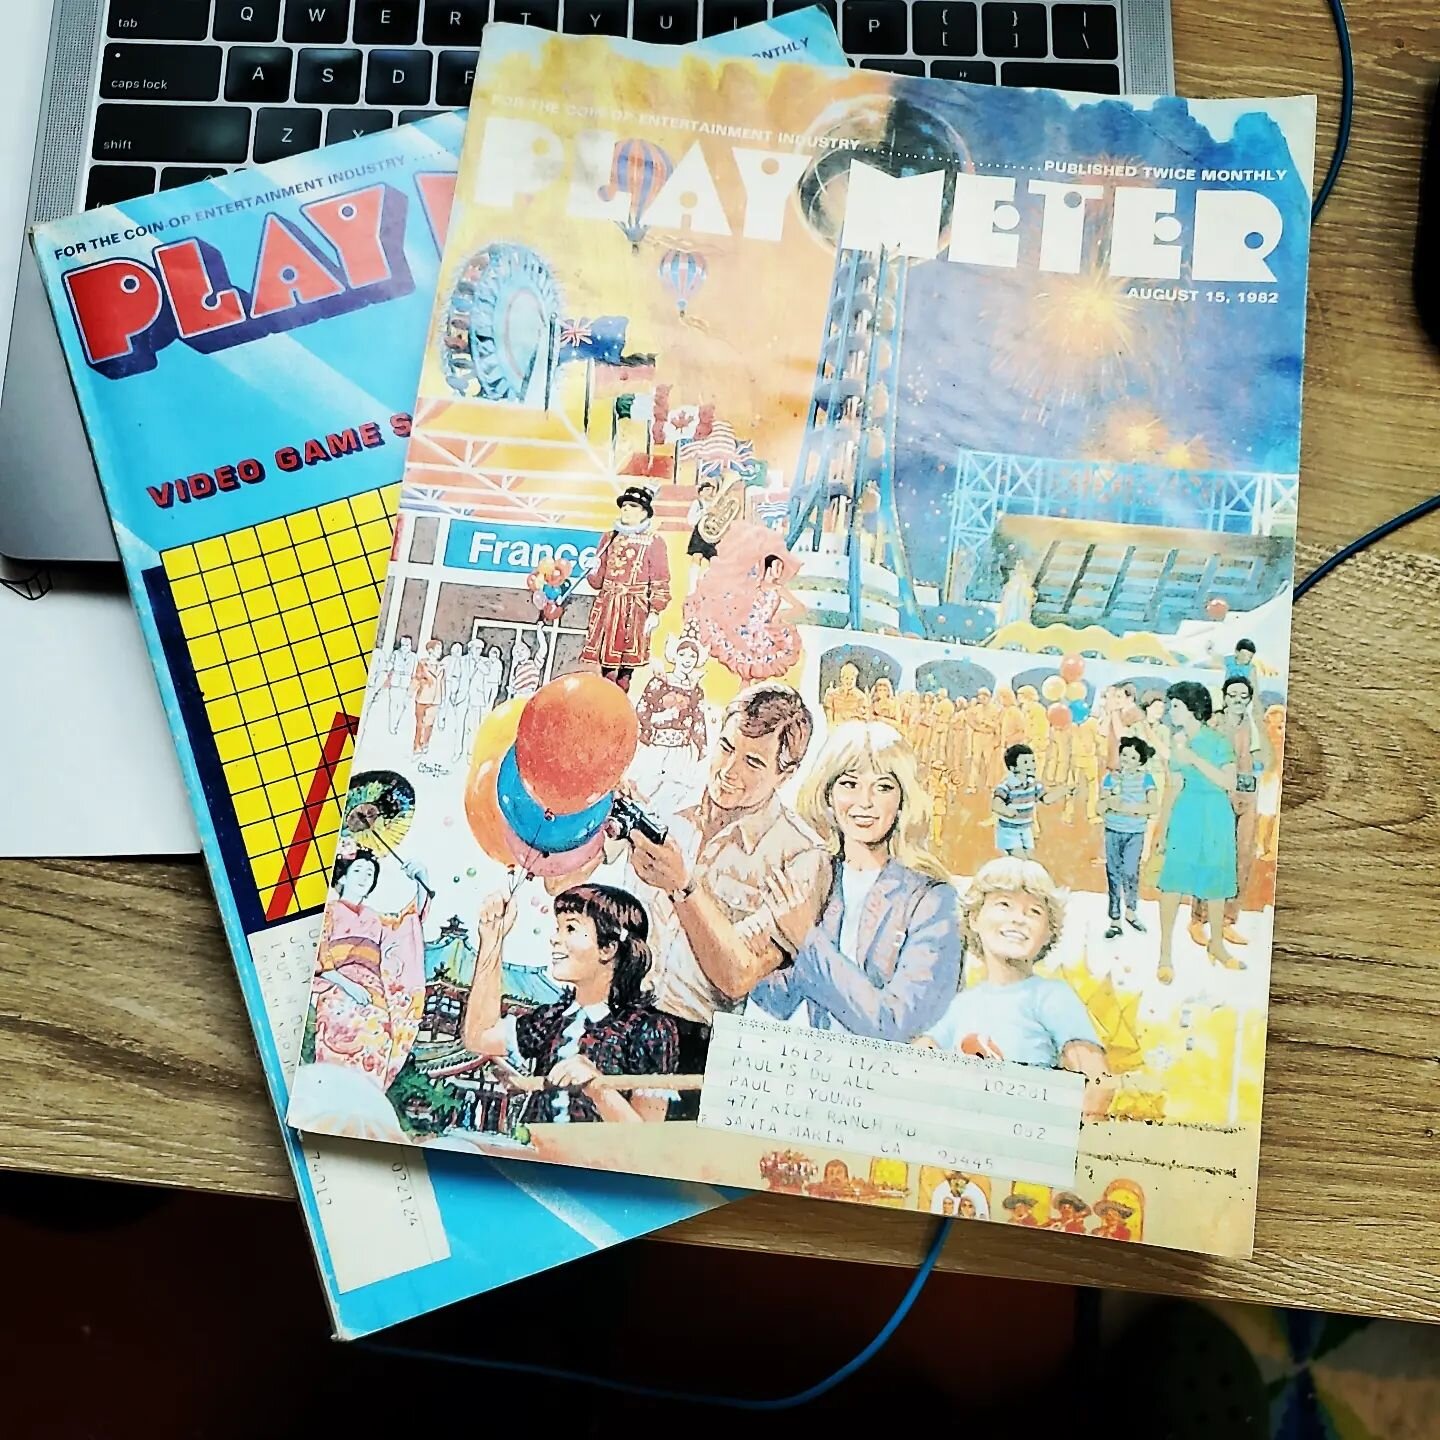 New Play Meters arrived today. One exploring the &quot;State of the Industry,&quot; and the other having some essential reading about the 1982 &quot;World's Fair&quot; in Knoxville, TN. Feel free to contact us at our website criticalplay.org or DM us